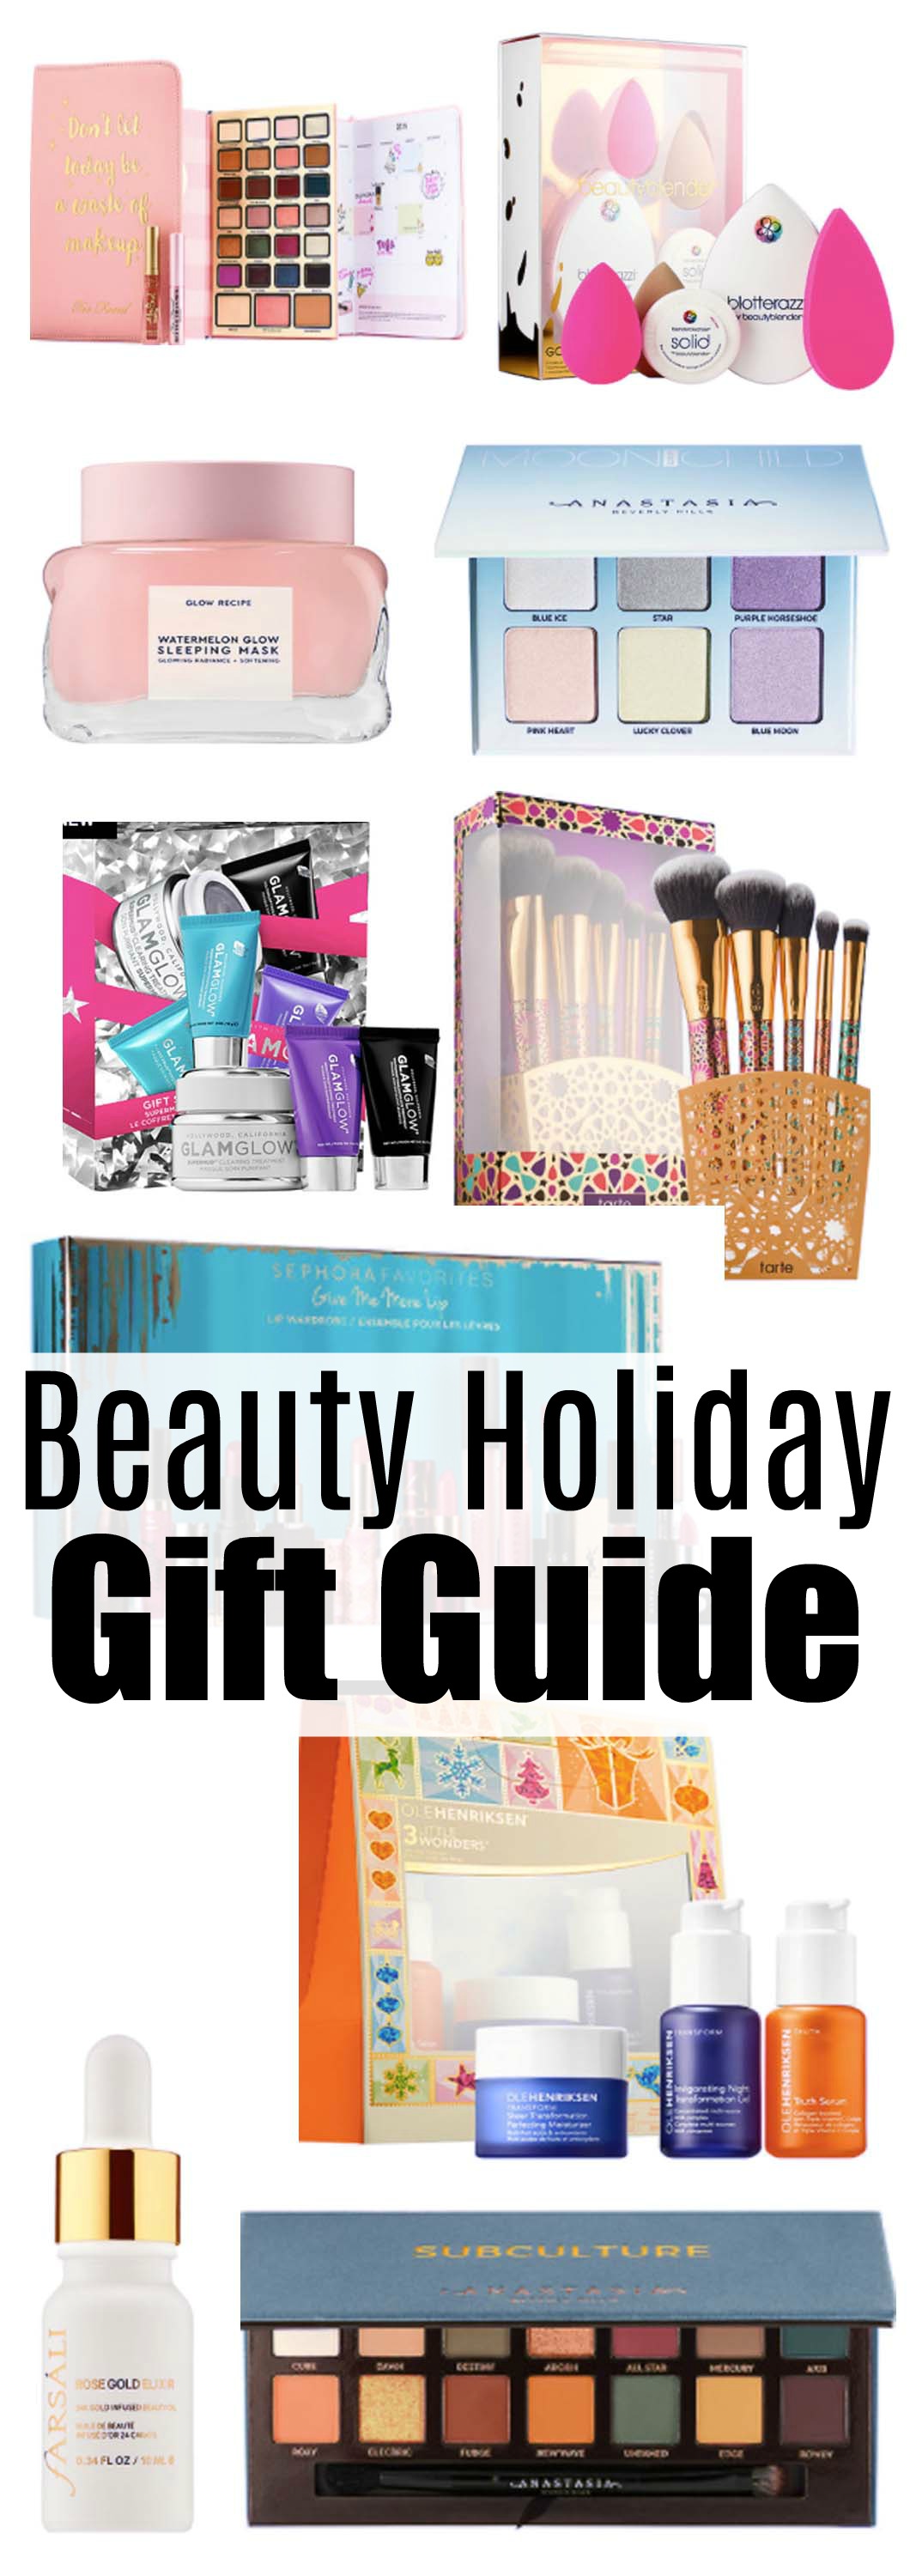 Beauty Holiday Gift Guide by Atlanta style blogger Happily Hughes